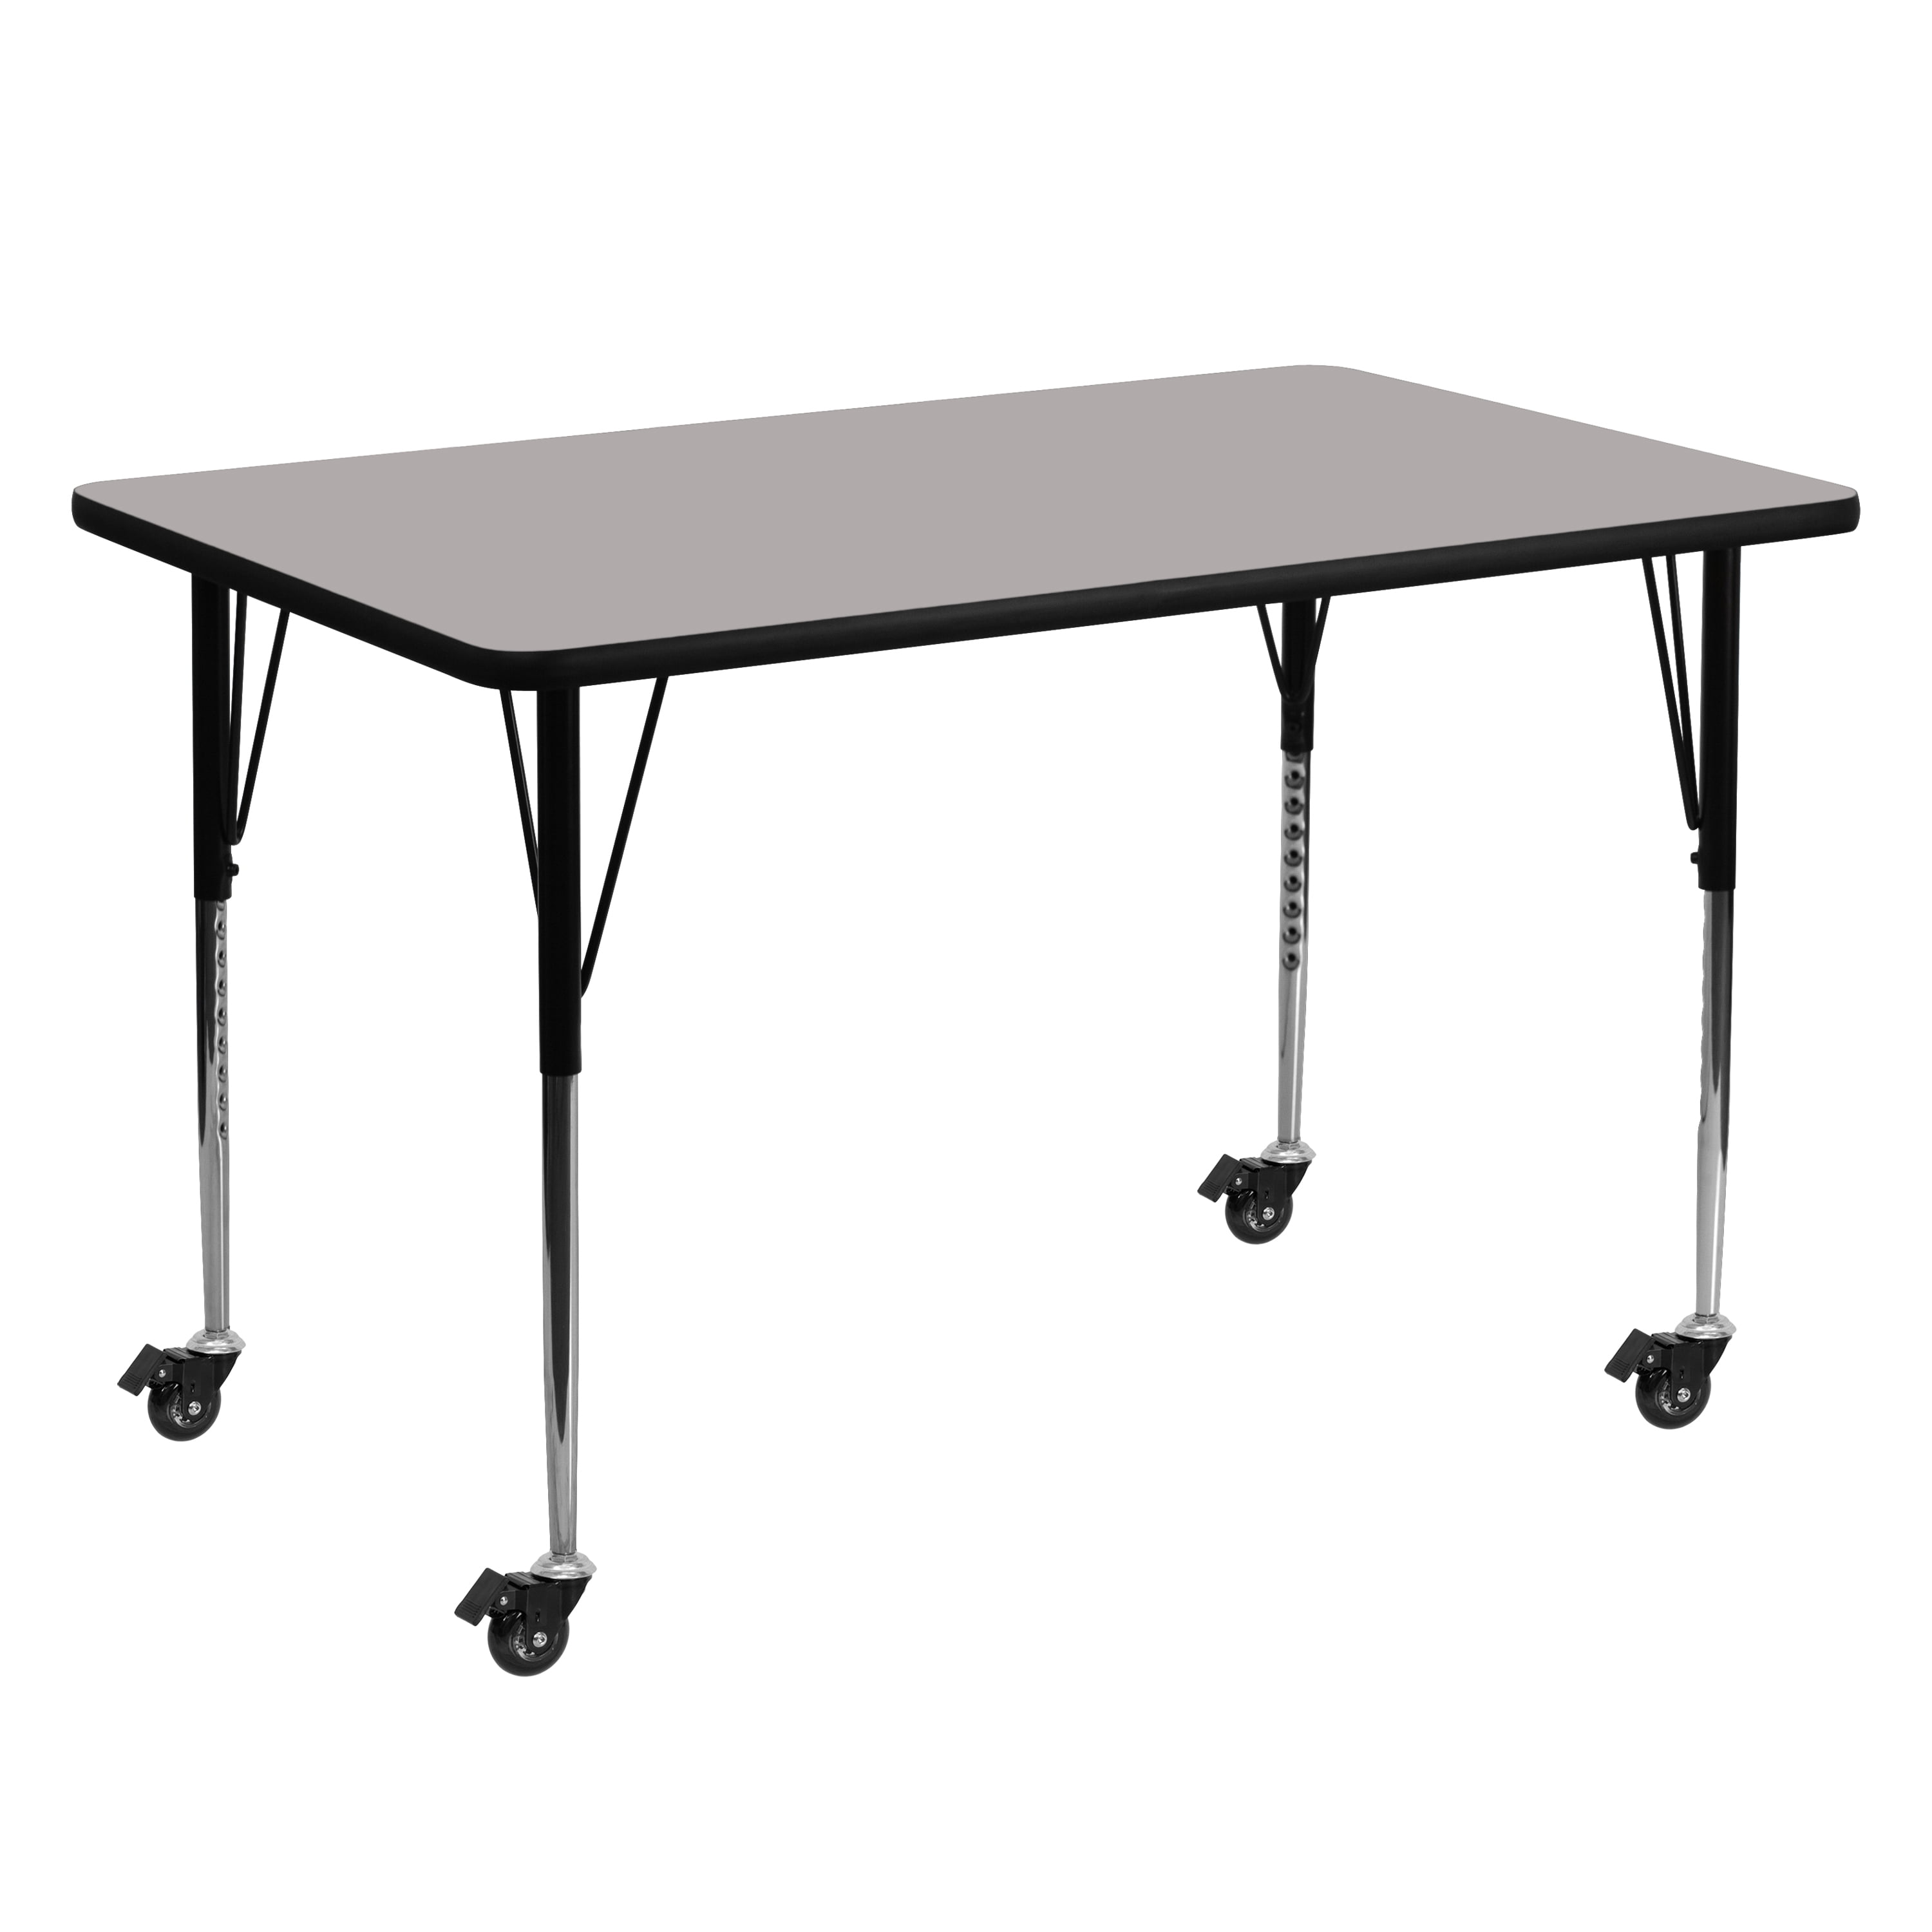 36 W x 60 L Rectangle Adjustable-Height Mobile Preschool Activity Table